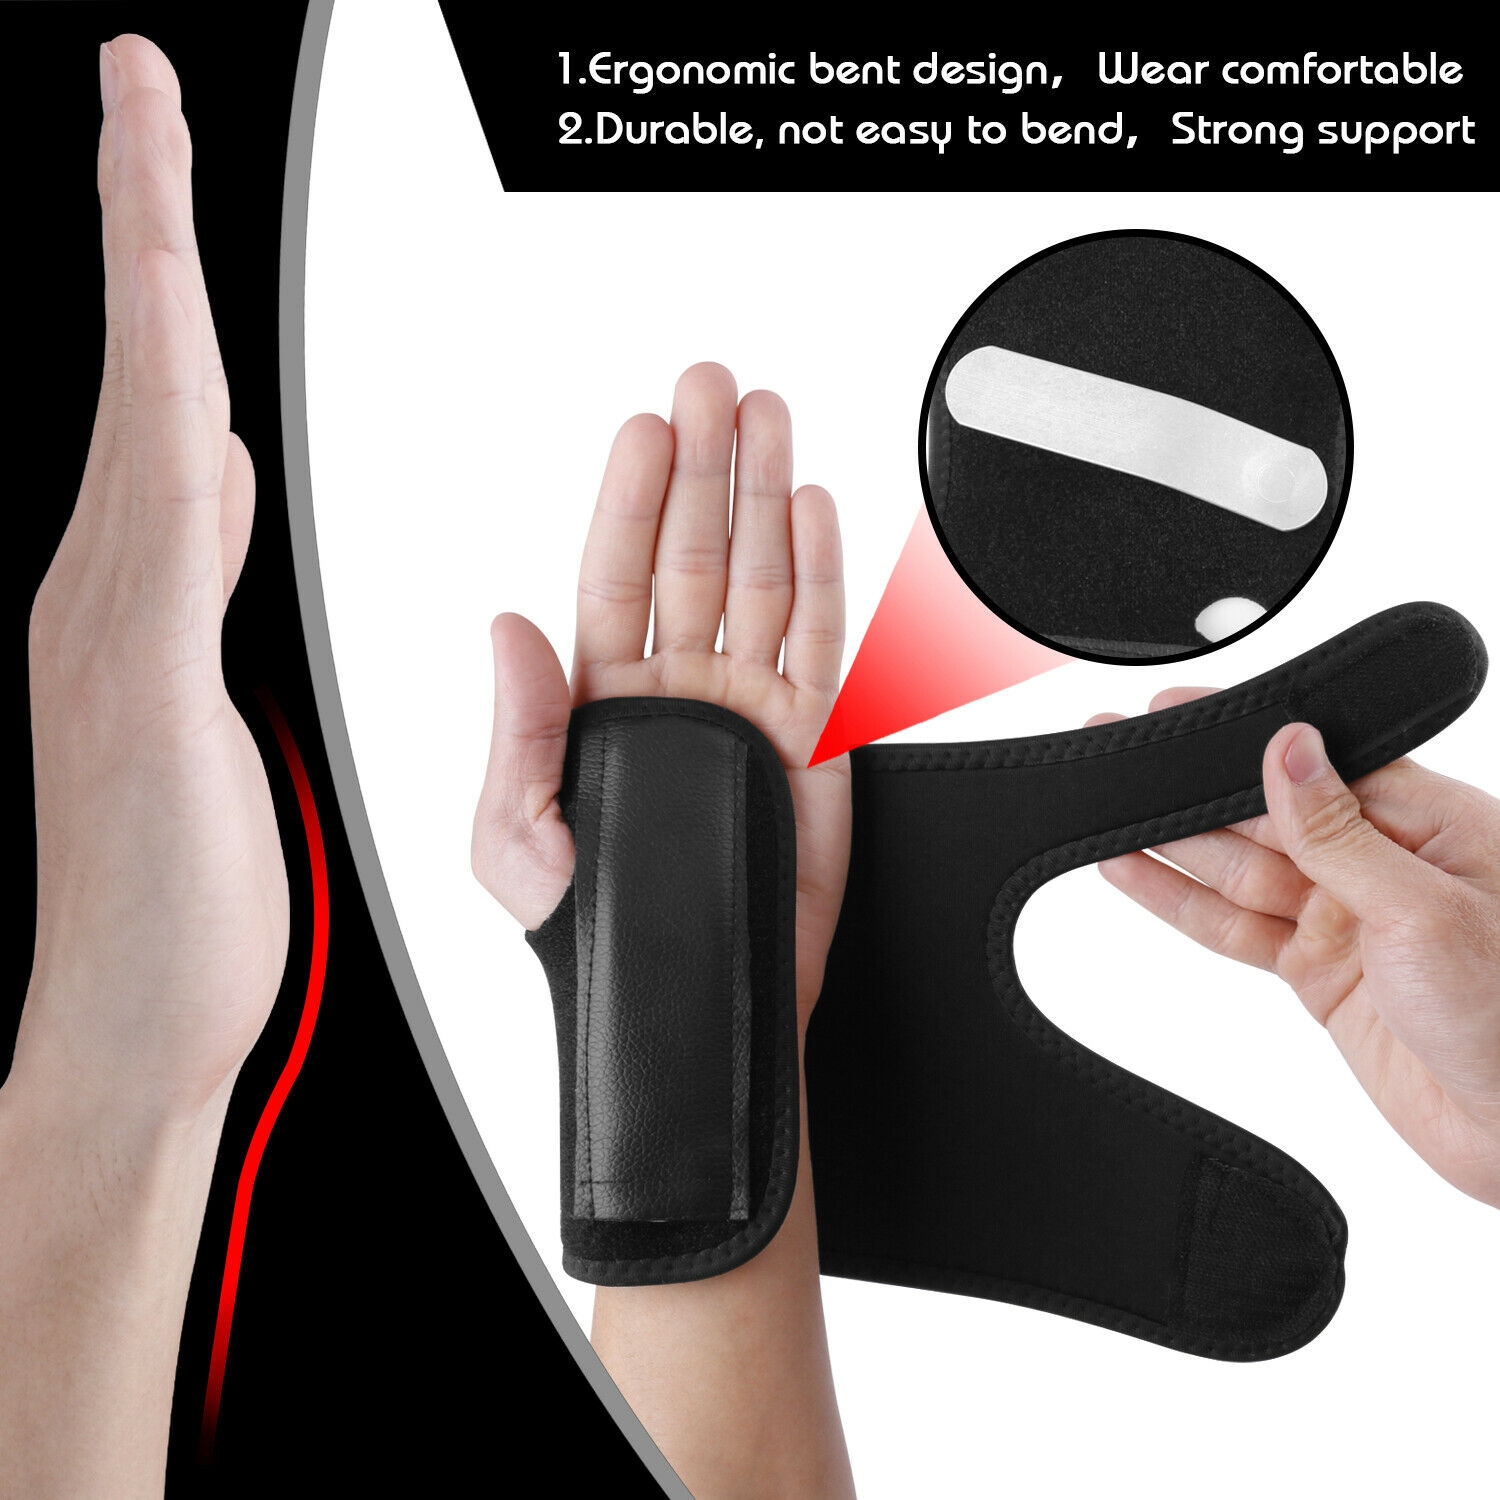 Carpal Tunnel Wrist Brace Night Support - Wrist Splint Arm Stabilizer &  Hand Brace for Carpal Tunnel Syndrome Pain Relief with Compression Sleeve  for